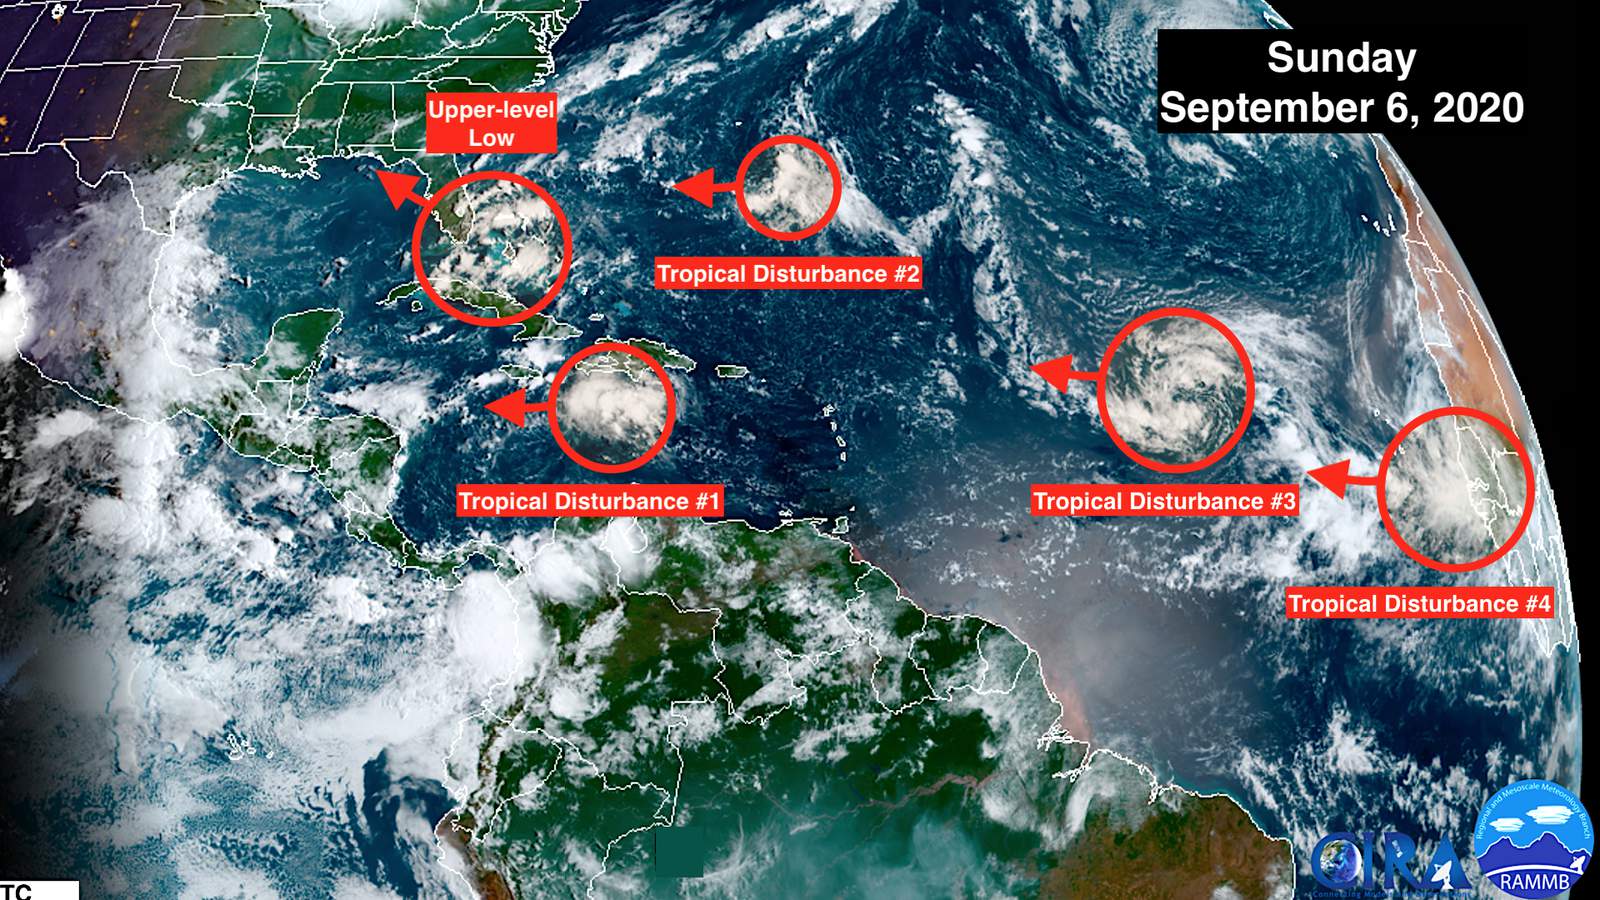 Norcross: There are 4 disturbances to watch spread across the Atlantic